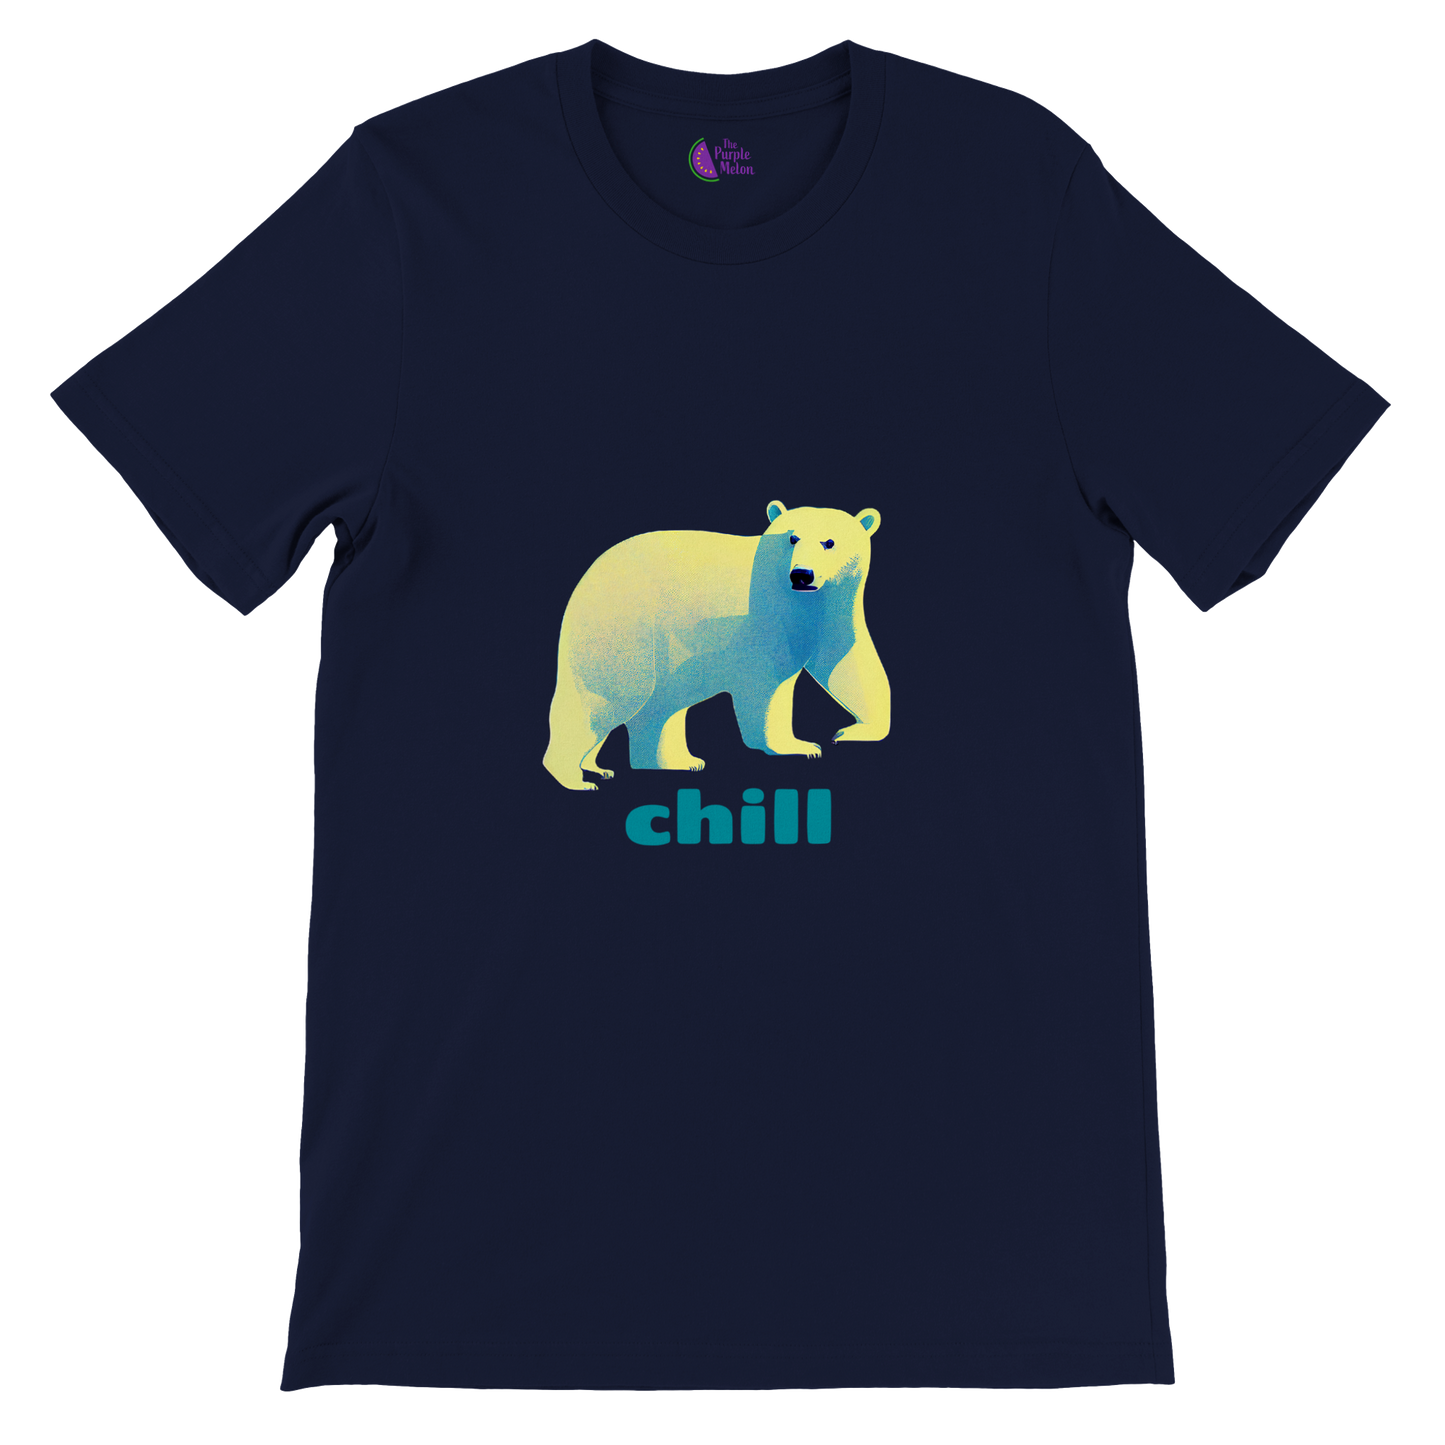 Navy t-shirt with a polar bear print with chill caption